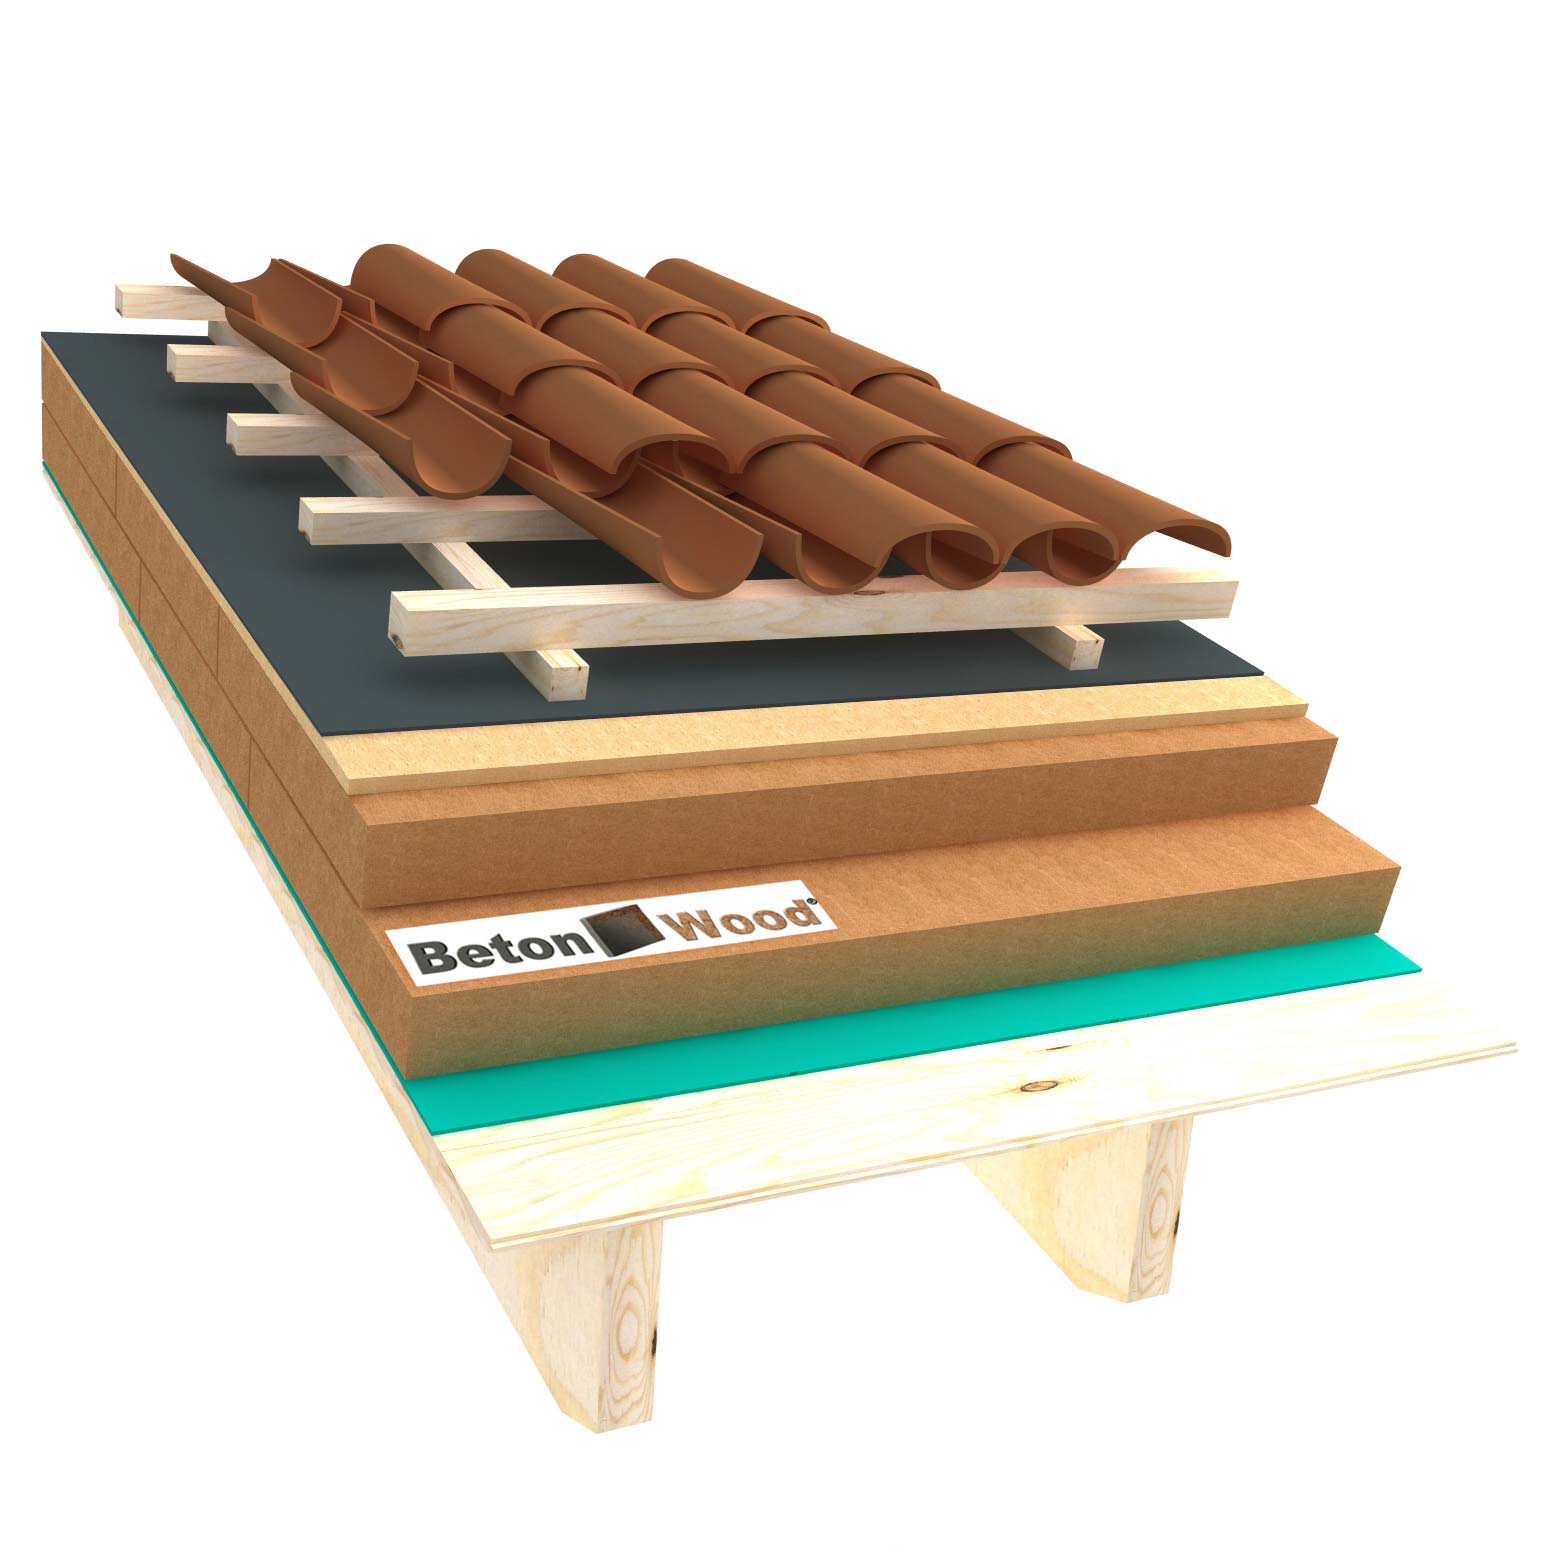 Ventilated roof with wood fiber Isorel and Universal on matchboarding